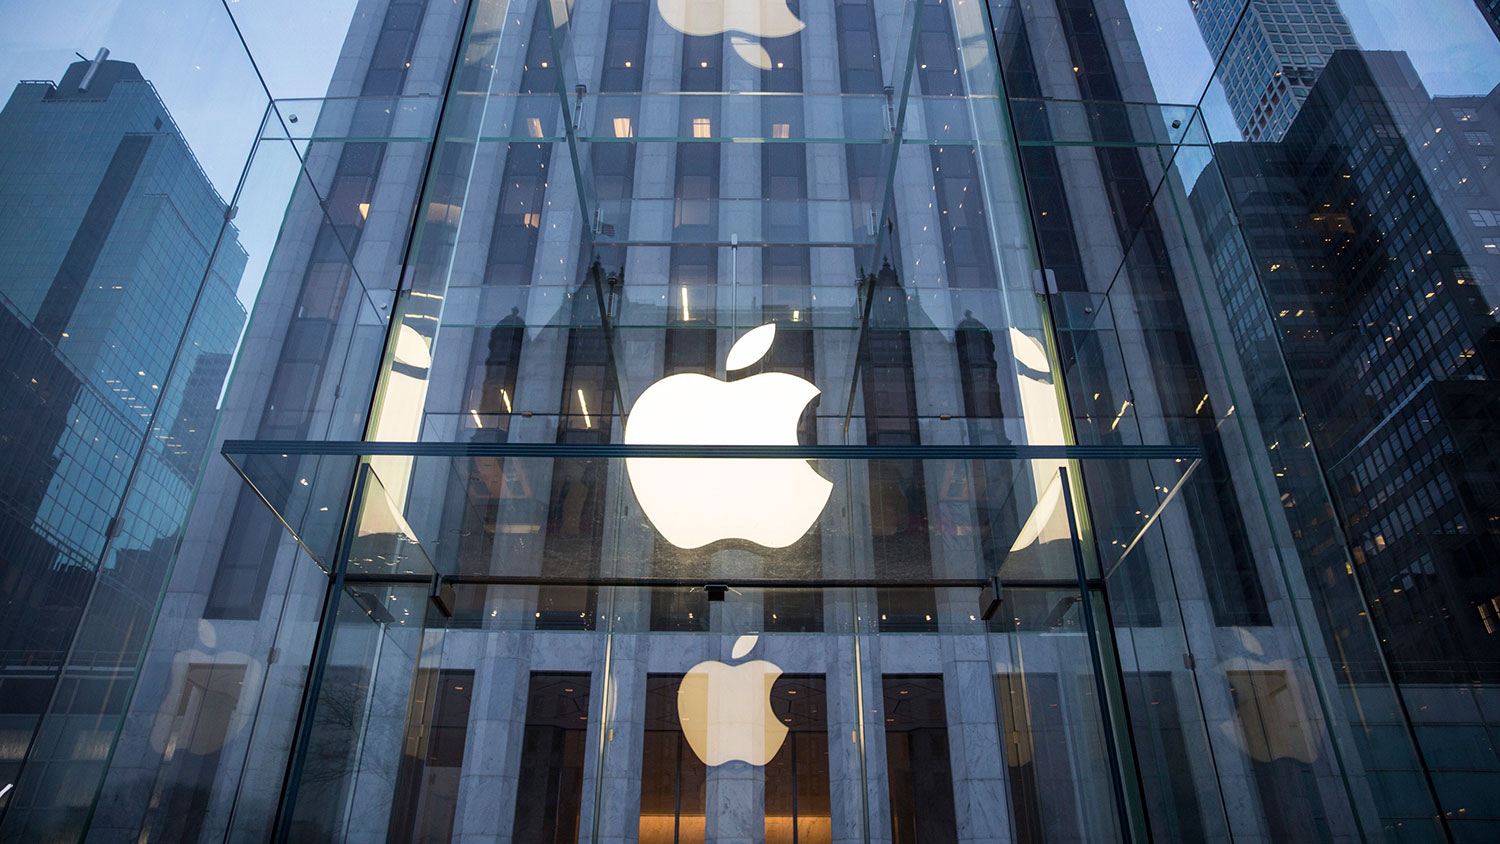 The Apple store on Fifth Avenue is seen on Jan. 26, 2016 in New York City.
